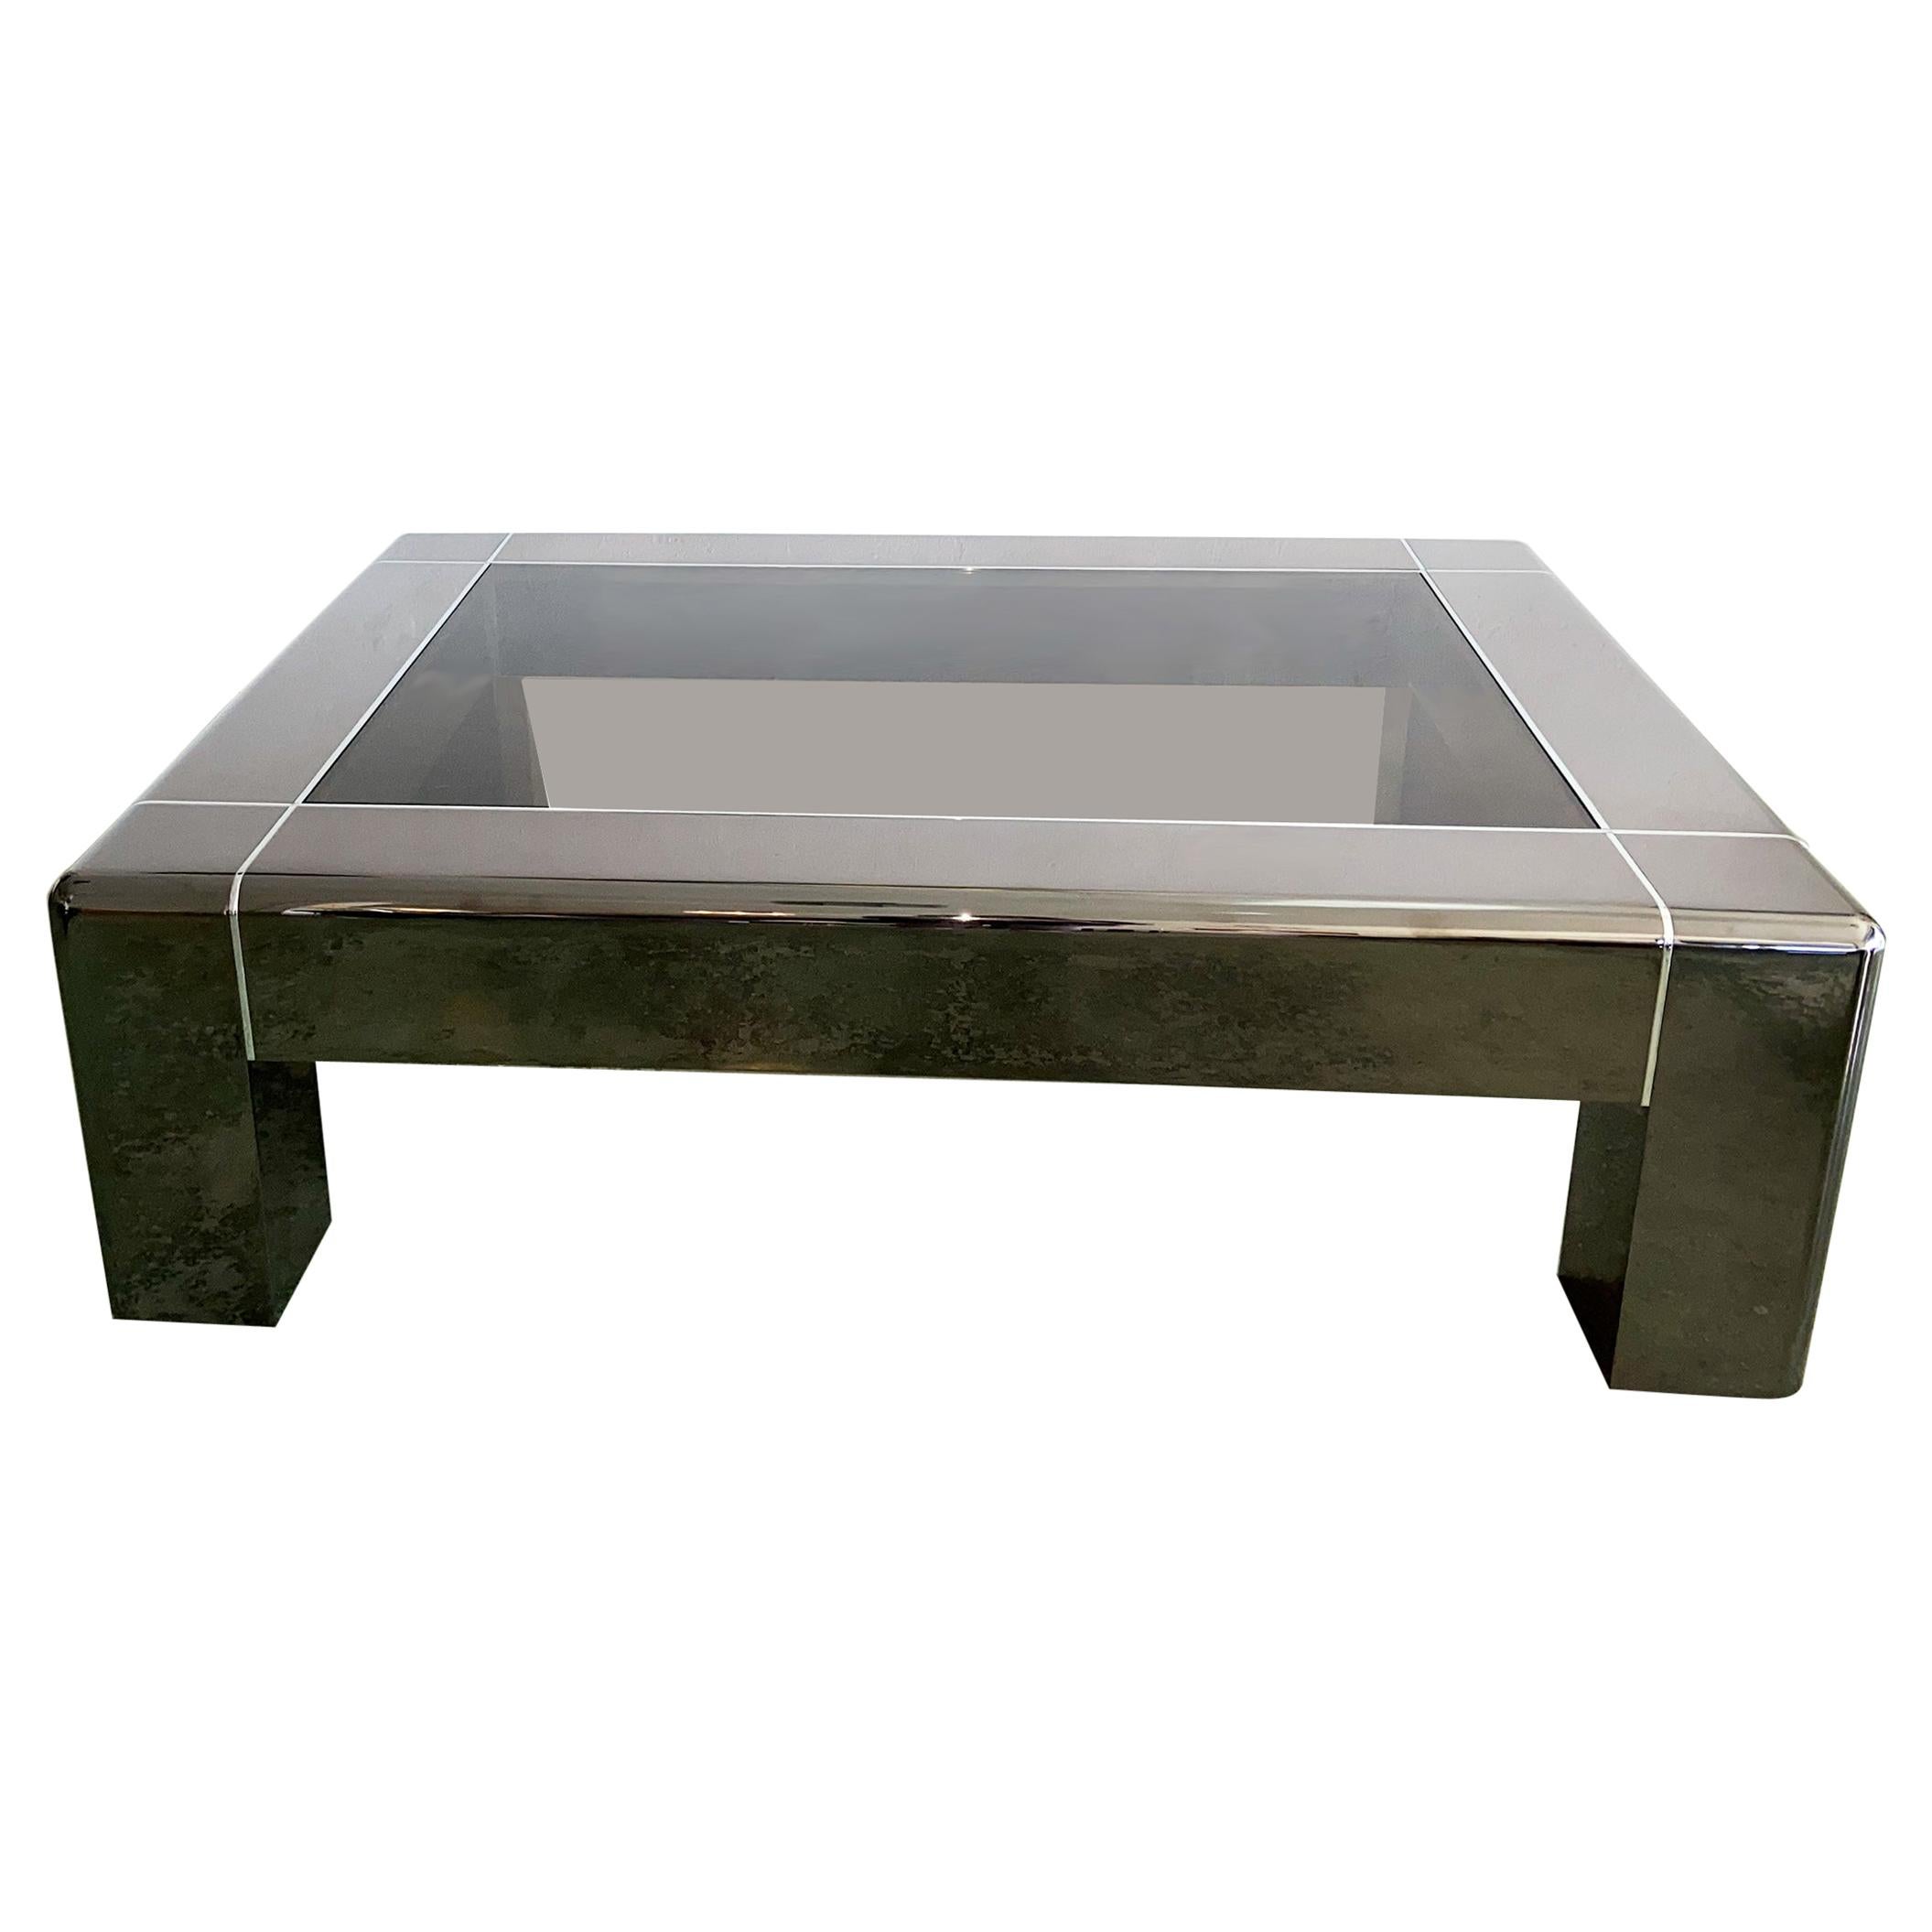 Karl Springer Cocktail or Coffee Table in Gunmetal and Polished Steel, 1980s